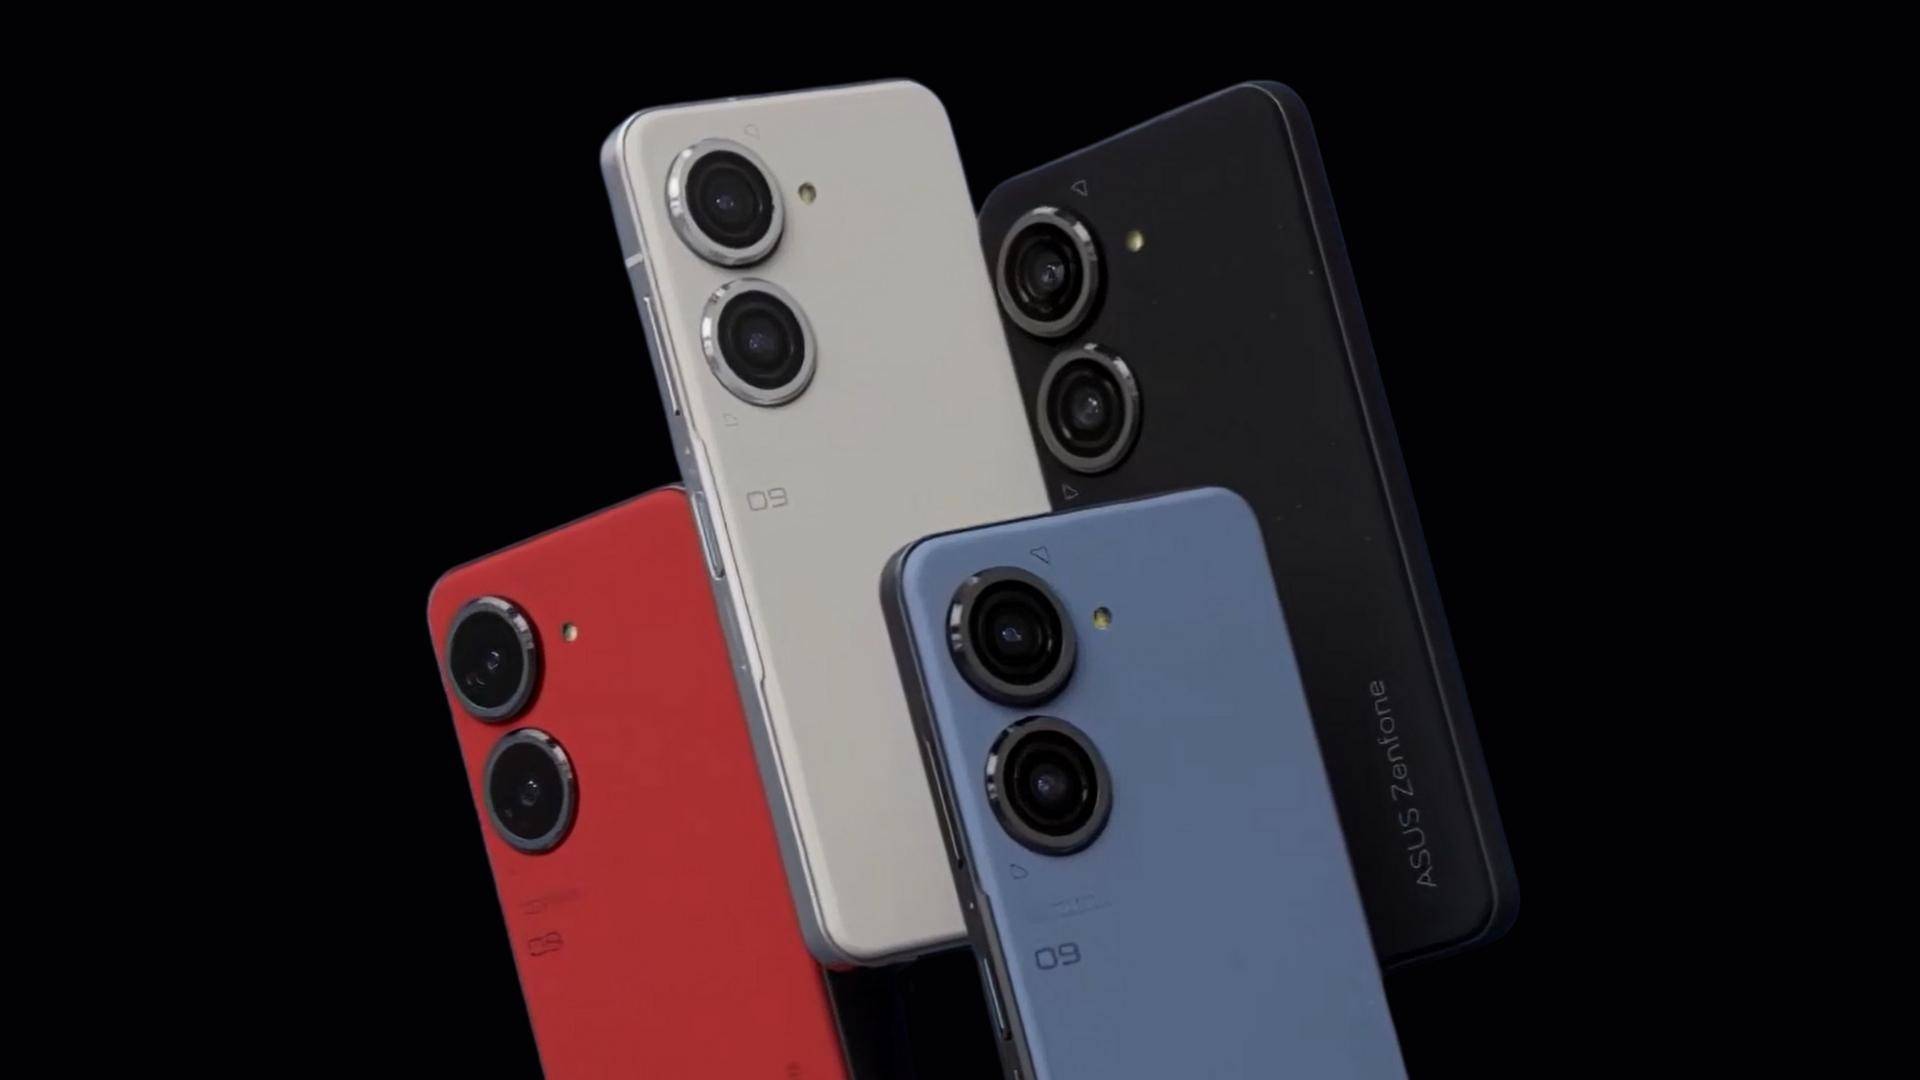 Zenfone 9 and its four colors on a black background